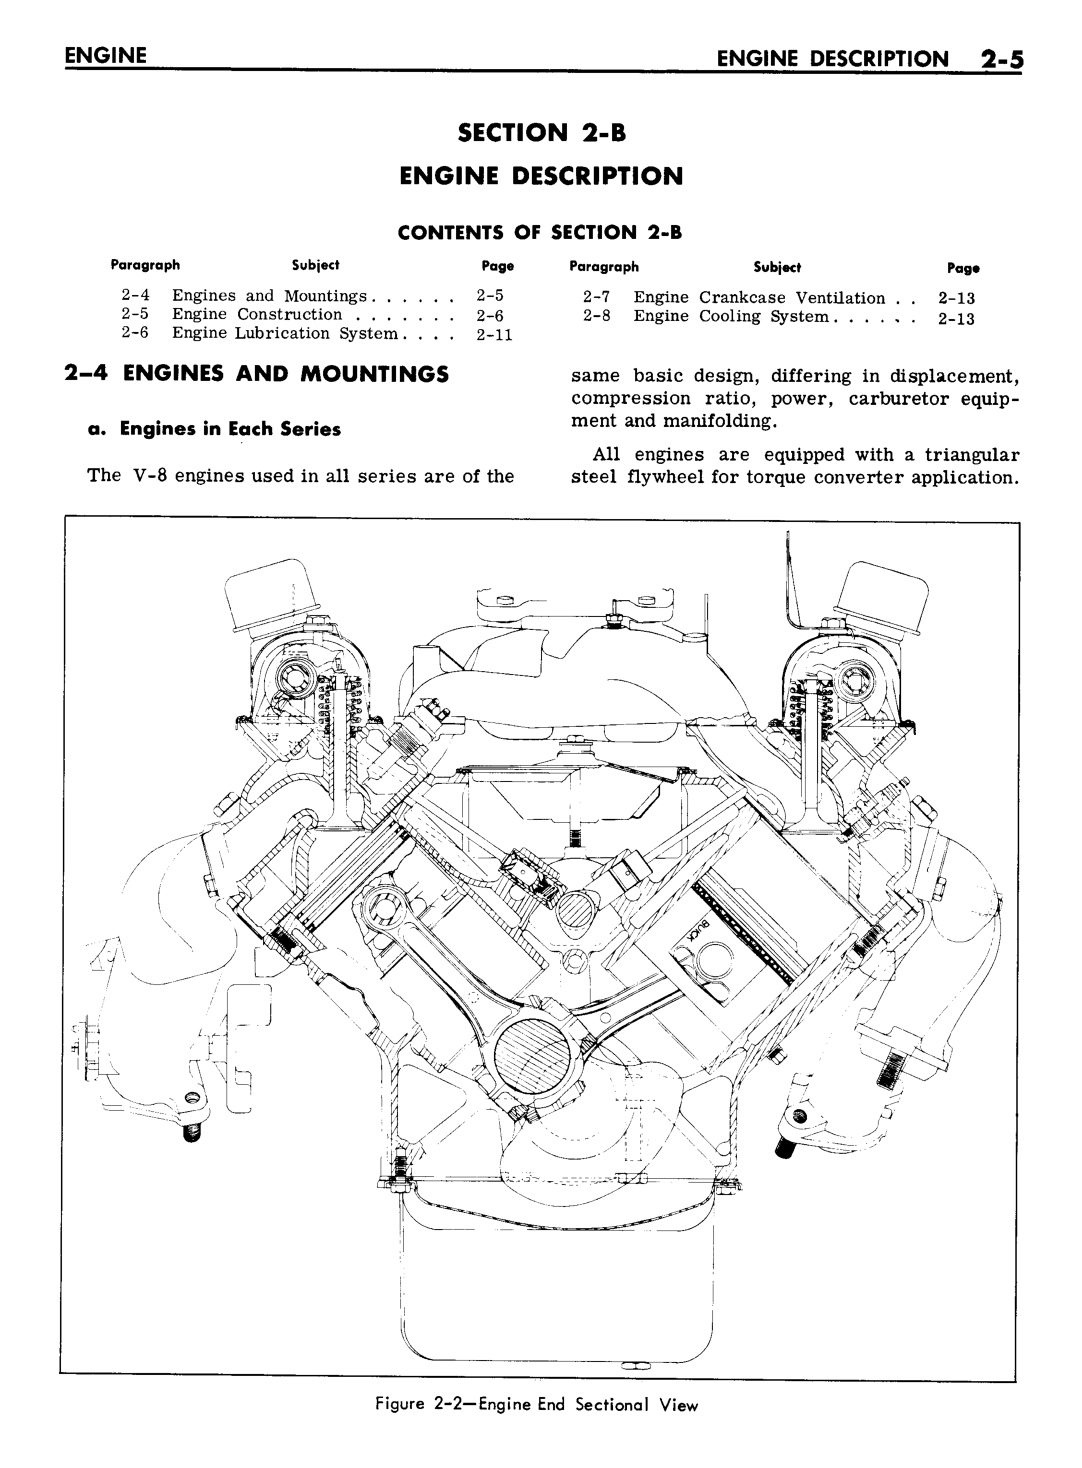 1961 Buick Chassis Service Manual - Engine Page 5 of 47